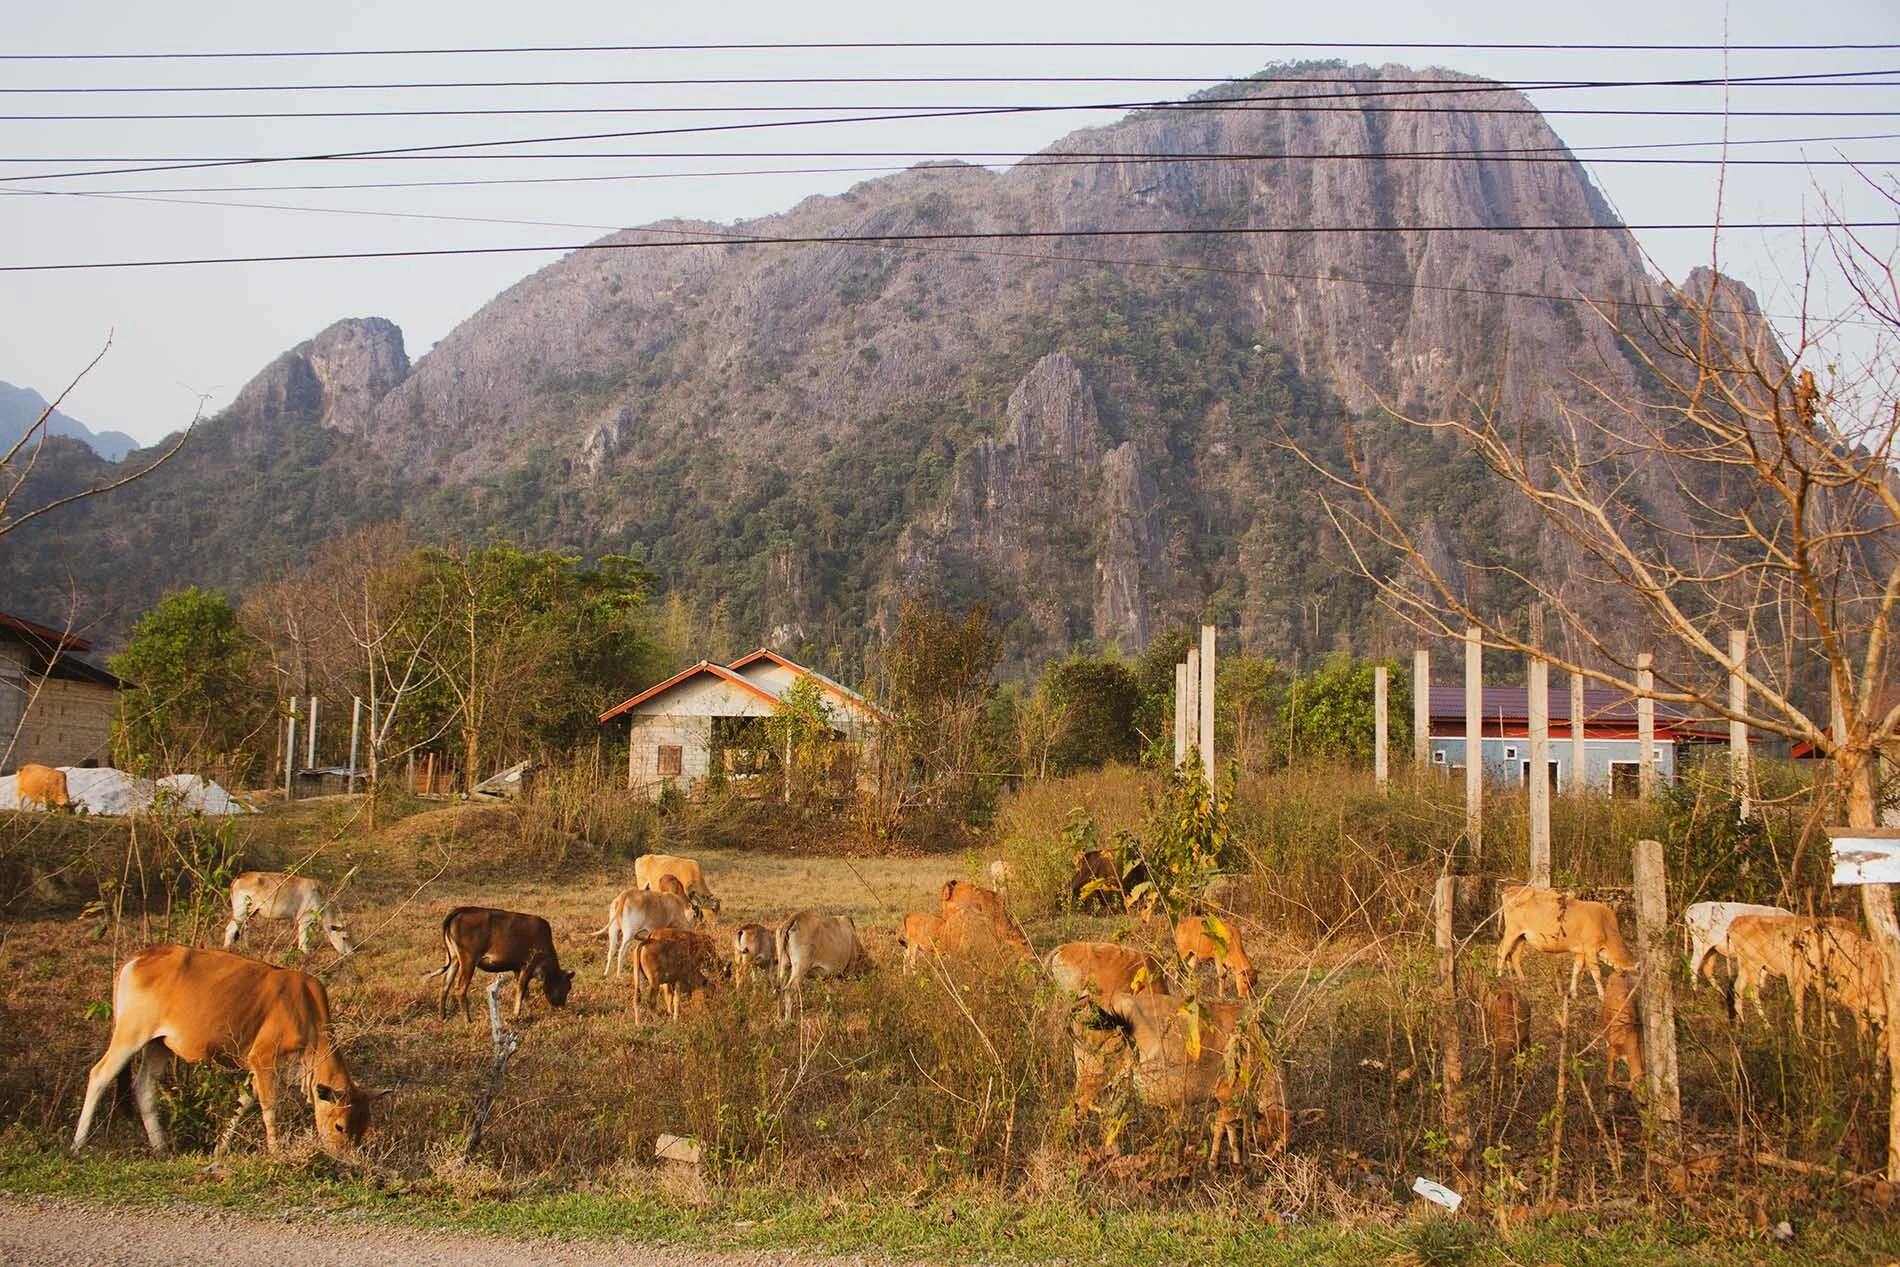 In the forefornt there are many cows, of brown colour, grazing. In the background there is a mountain with a small house in front of it.